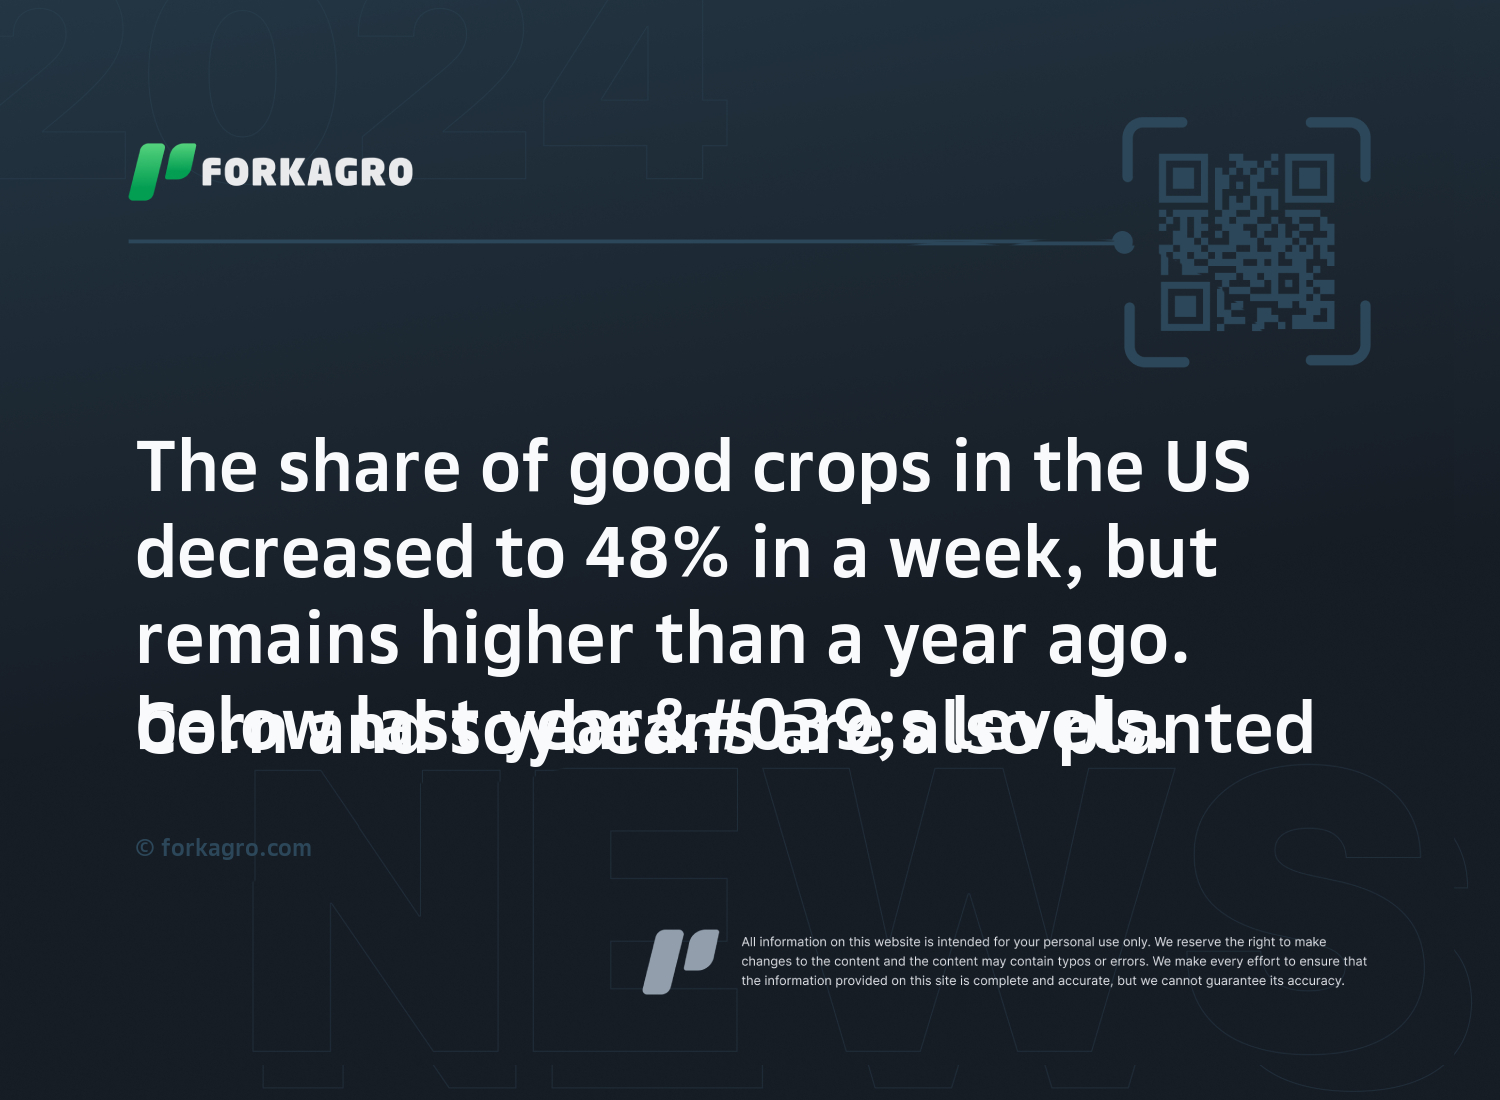 The share of good crops in the US decreased to 48% in a week, but remains higher than a year ago.
Corn and soybeans are also planted below last year's levels.